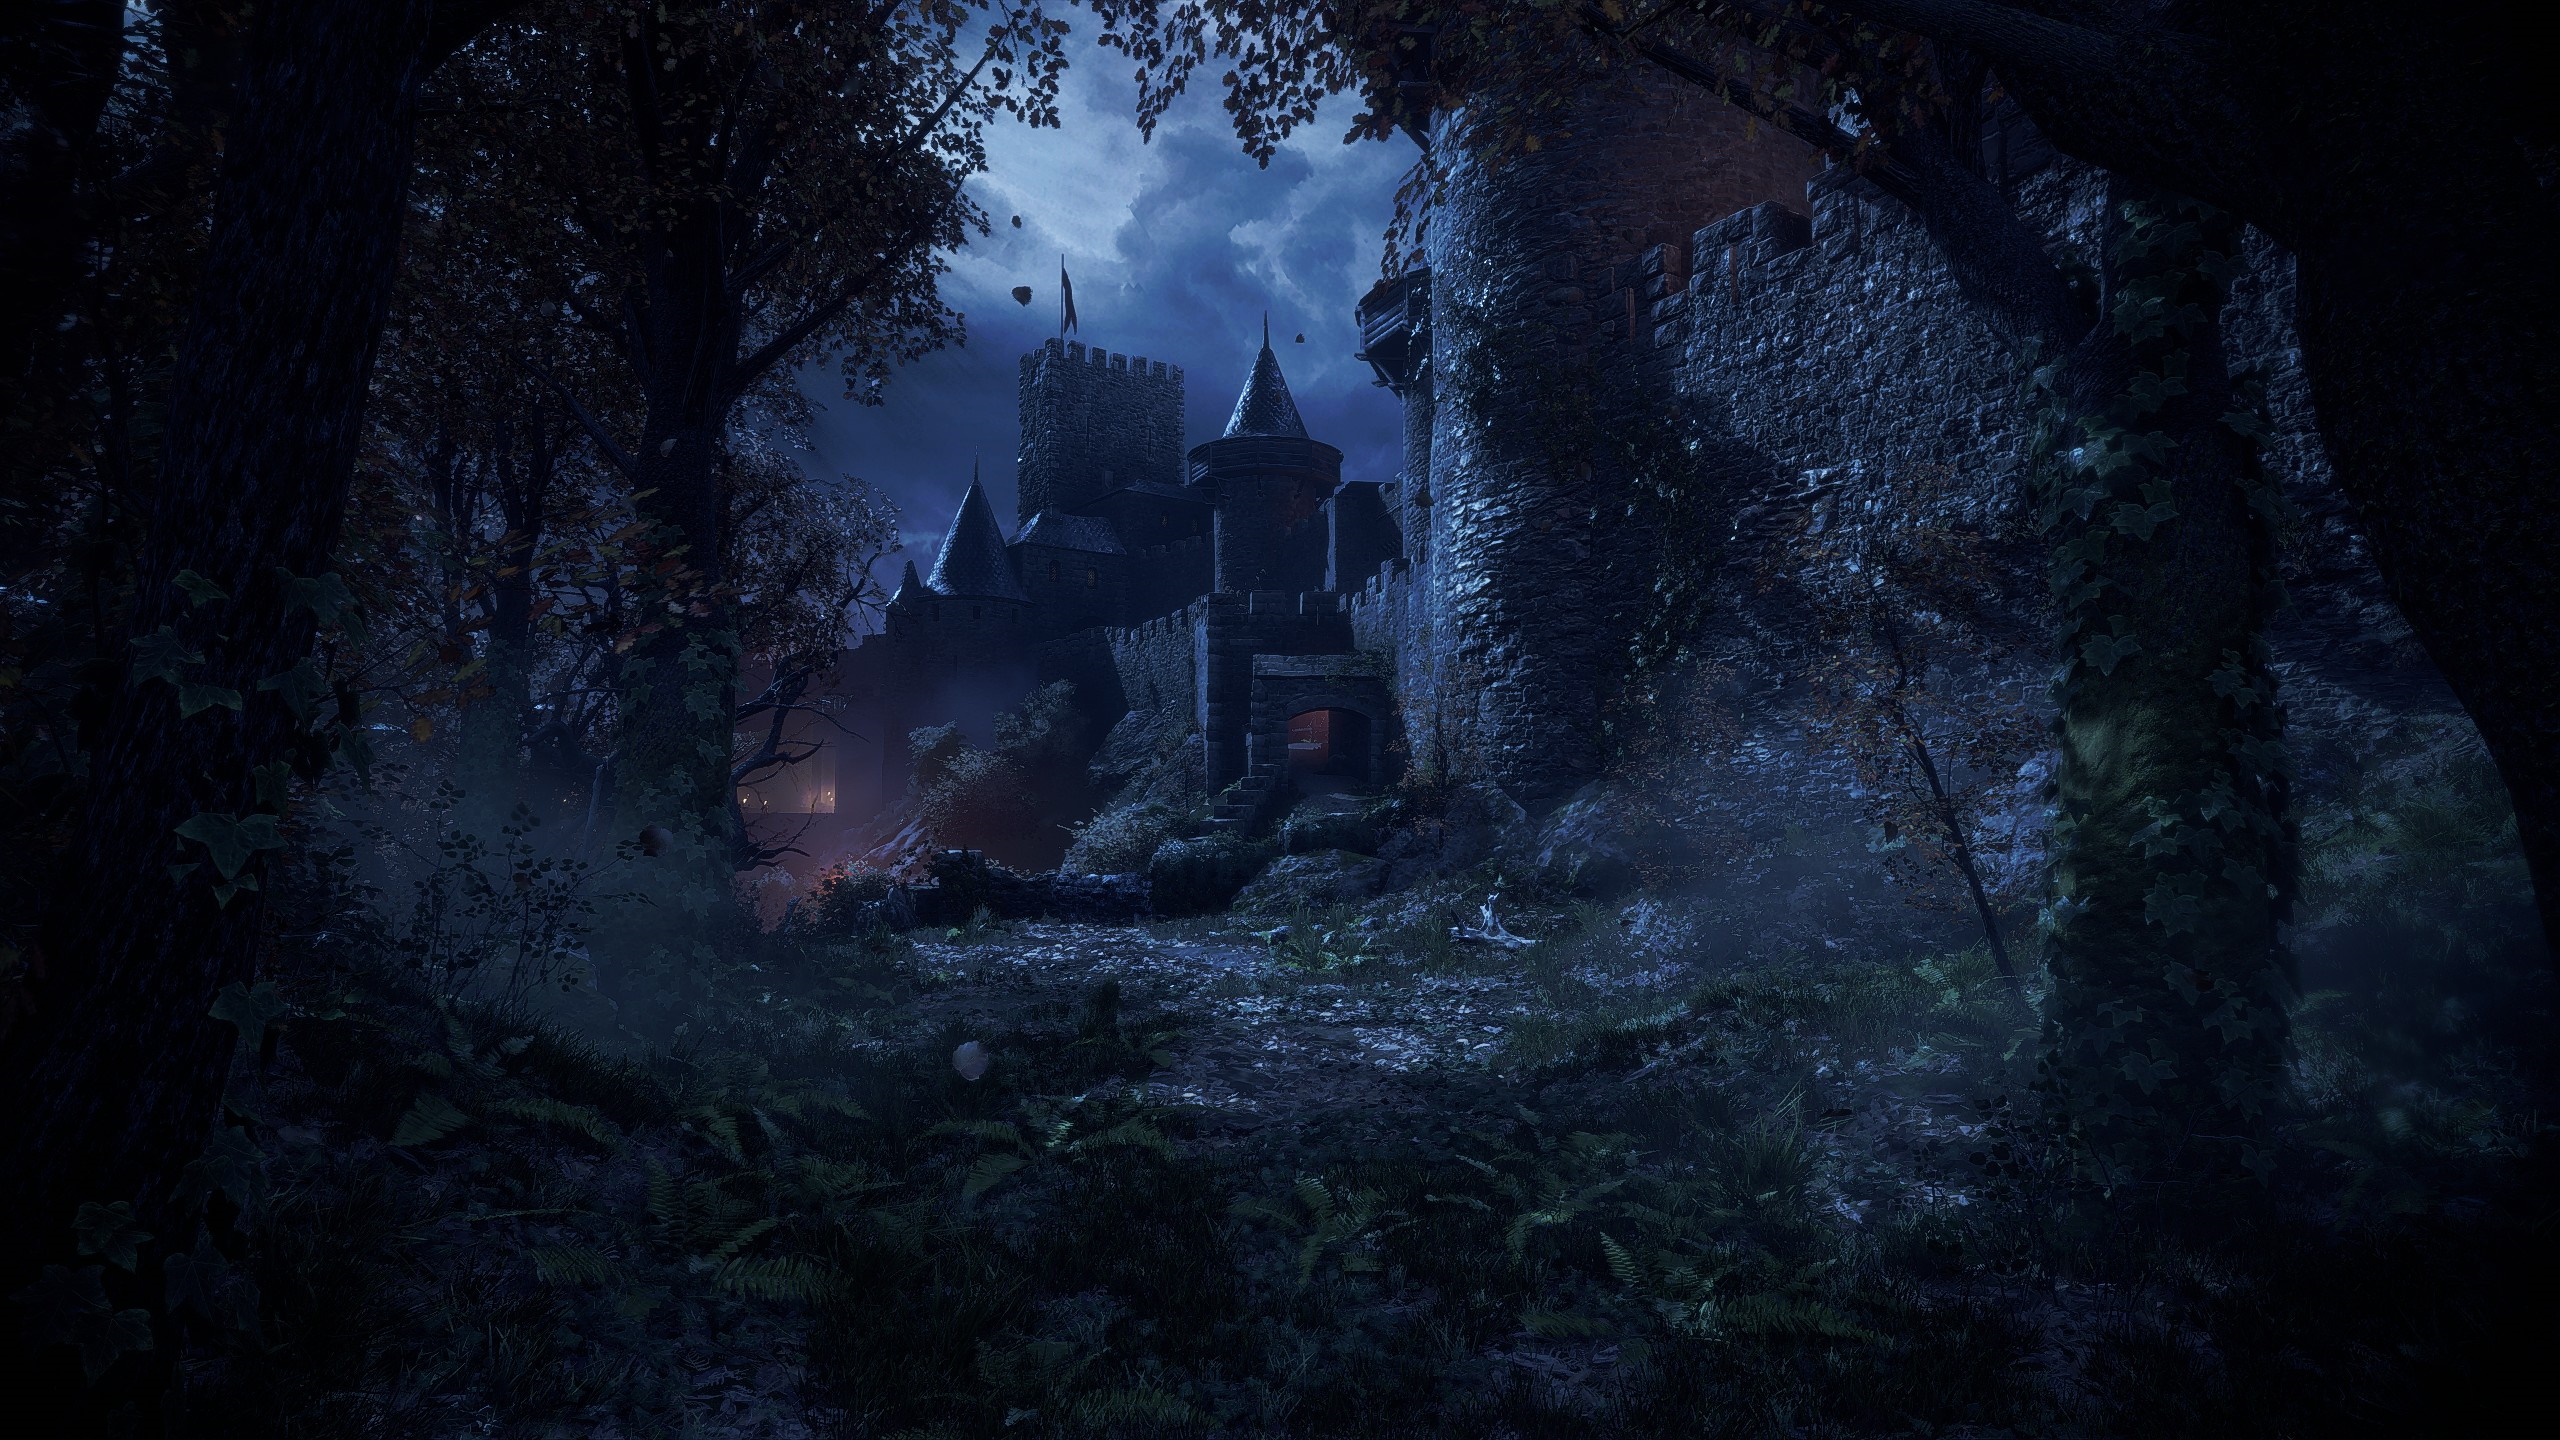 A Plague Tale Innocence Night PC Gaming Nvidia Unreal Engine 4 Castle Moonlight Screen Shot 2560x1440